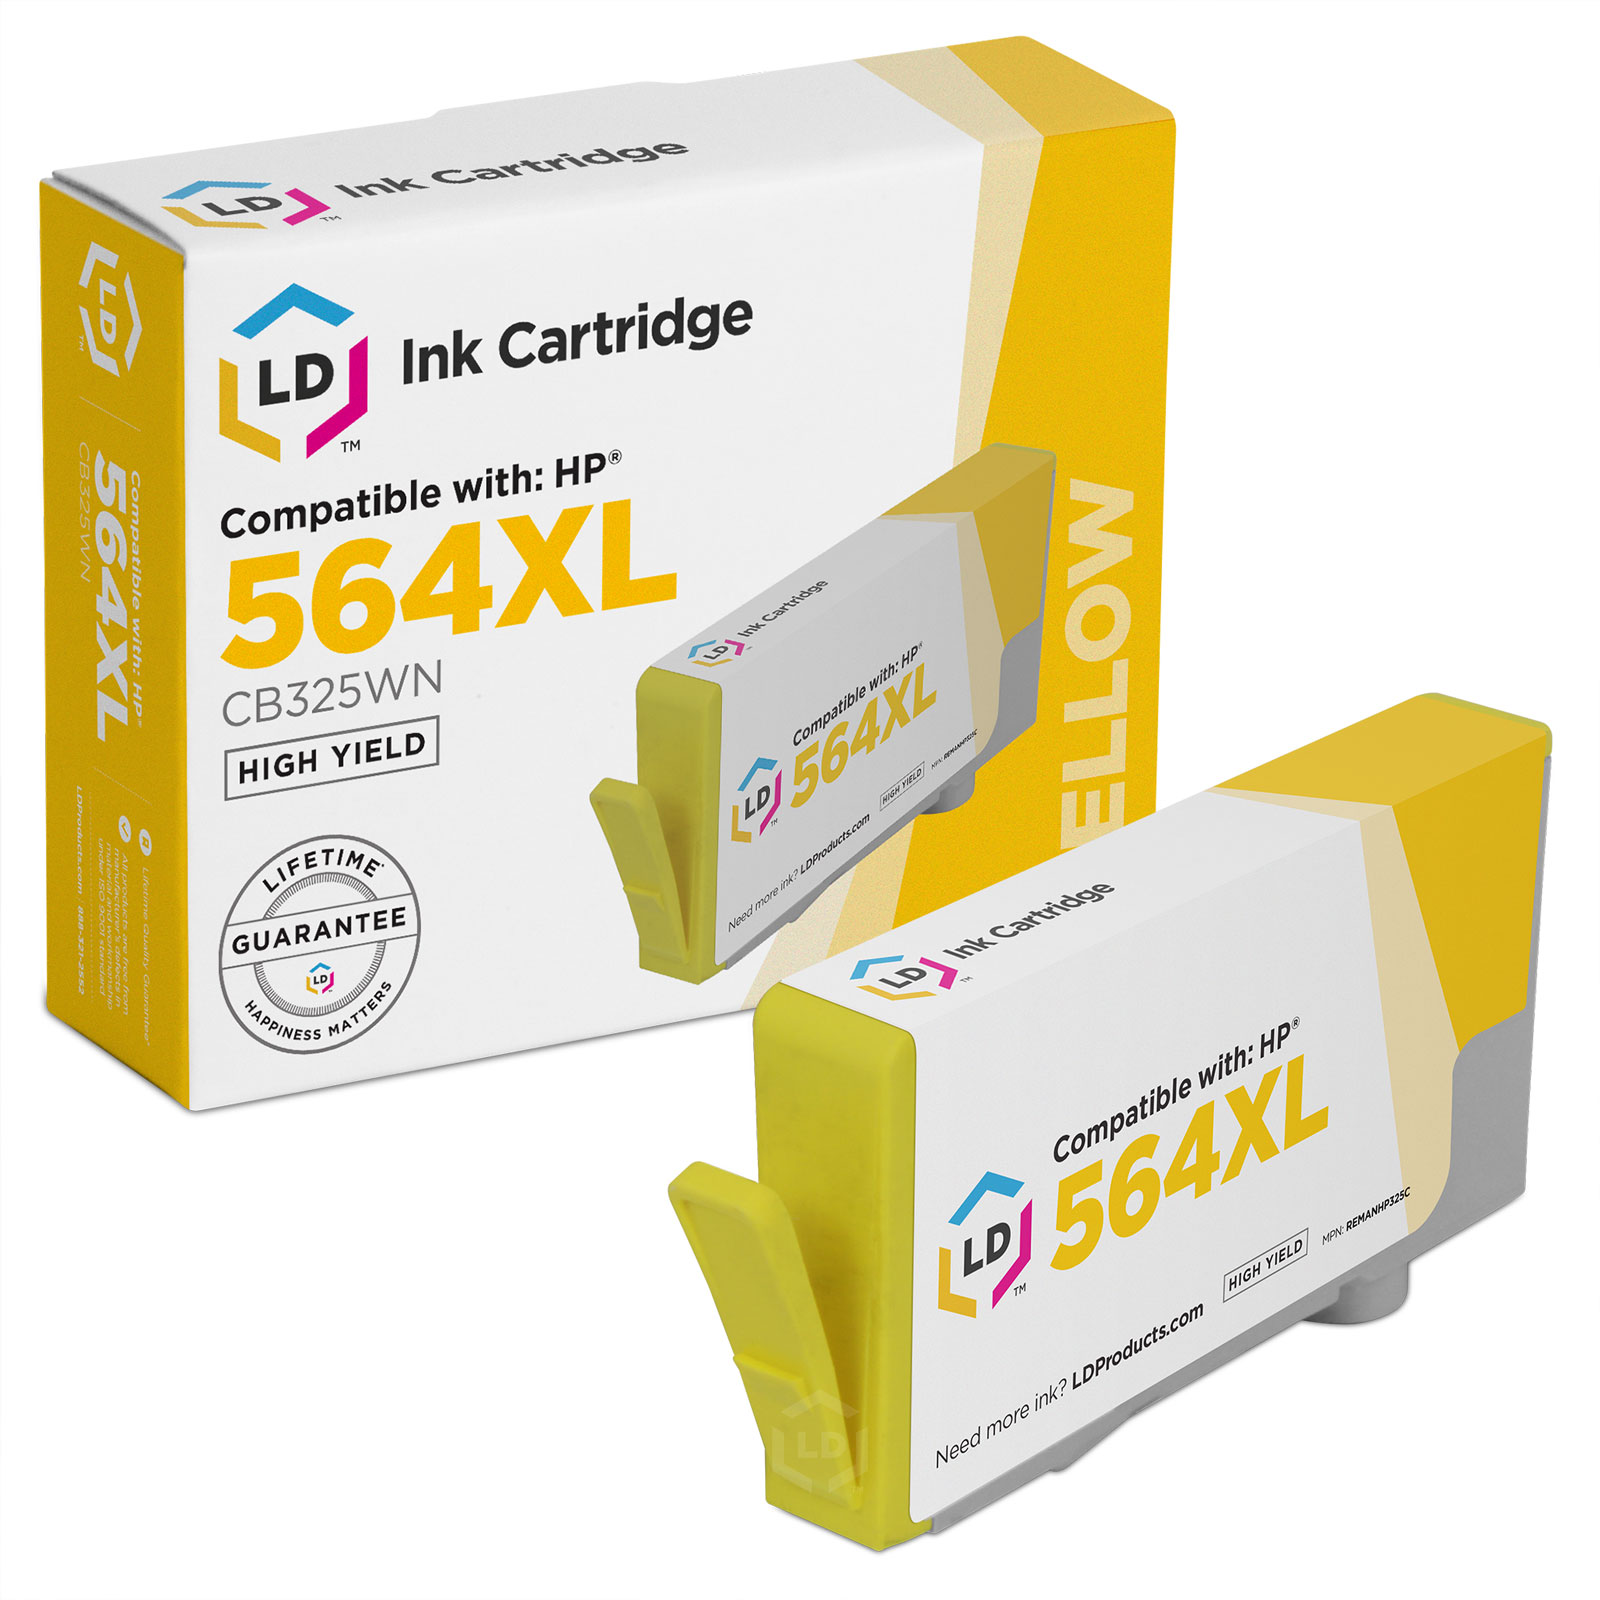 LD © Remanufactured Replacement Ink Cartridge for Hewlett Packard CB325WN 564XL / 564 High-Yield Yellow - Shows Accurate Ink Levels - image 1 of 1